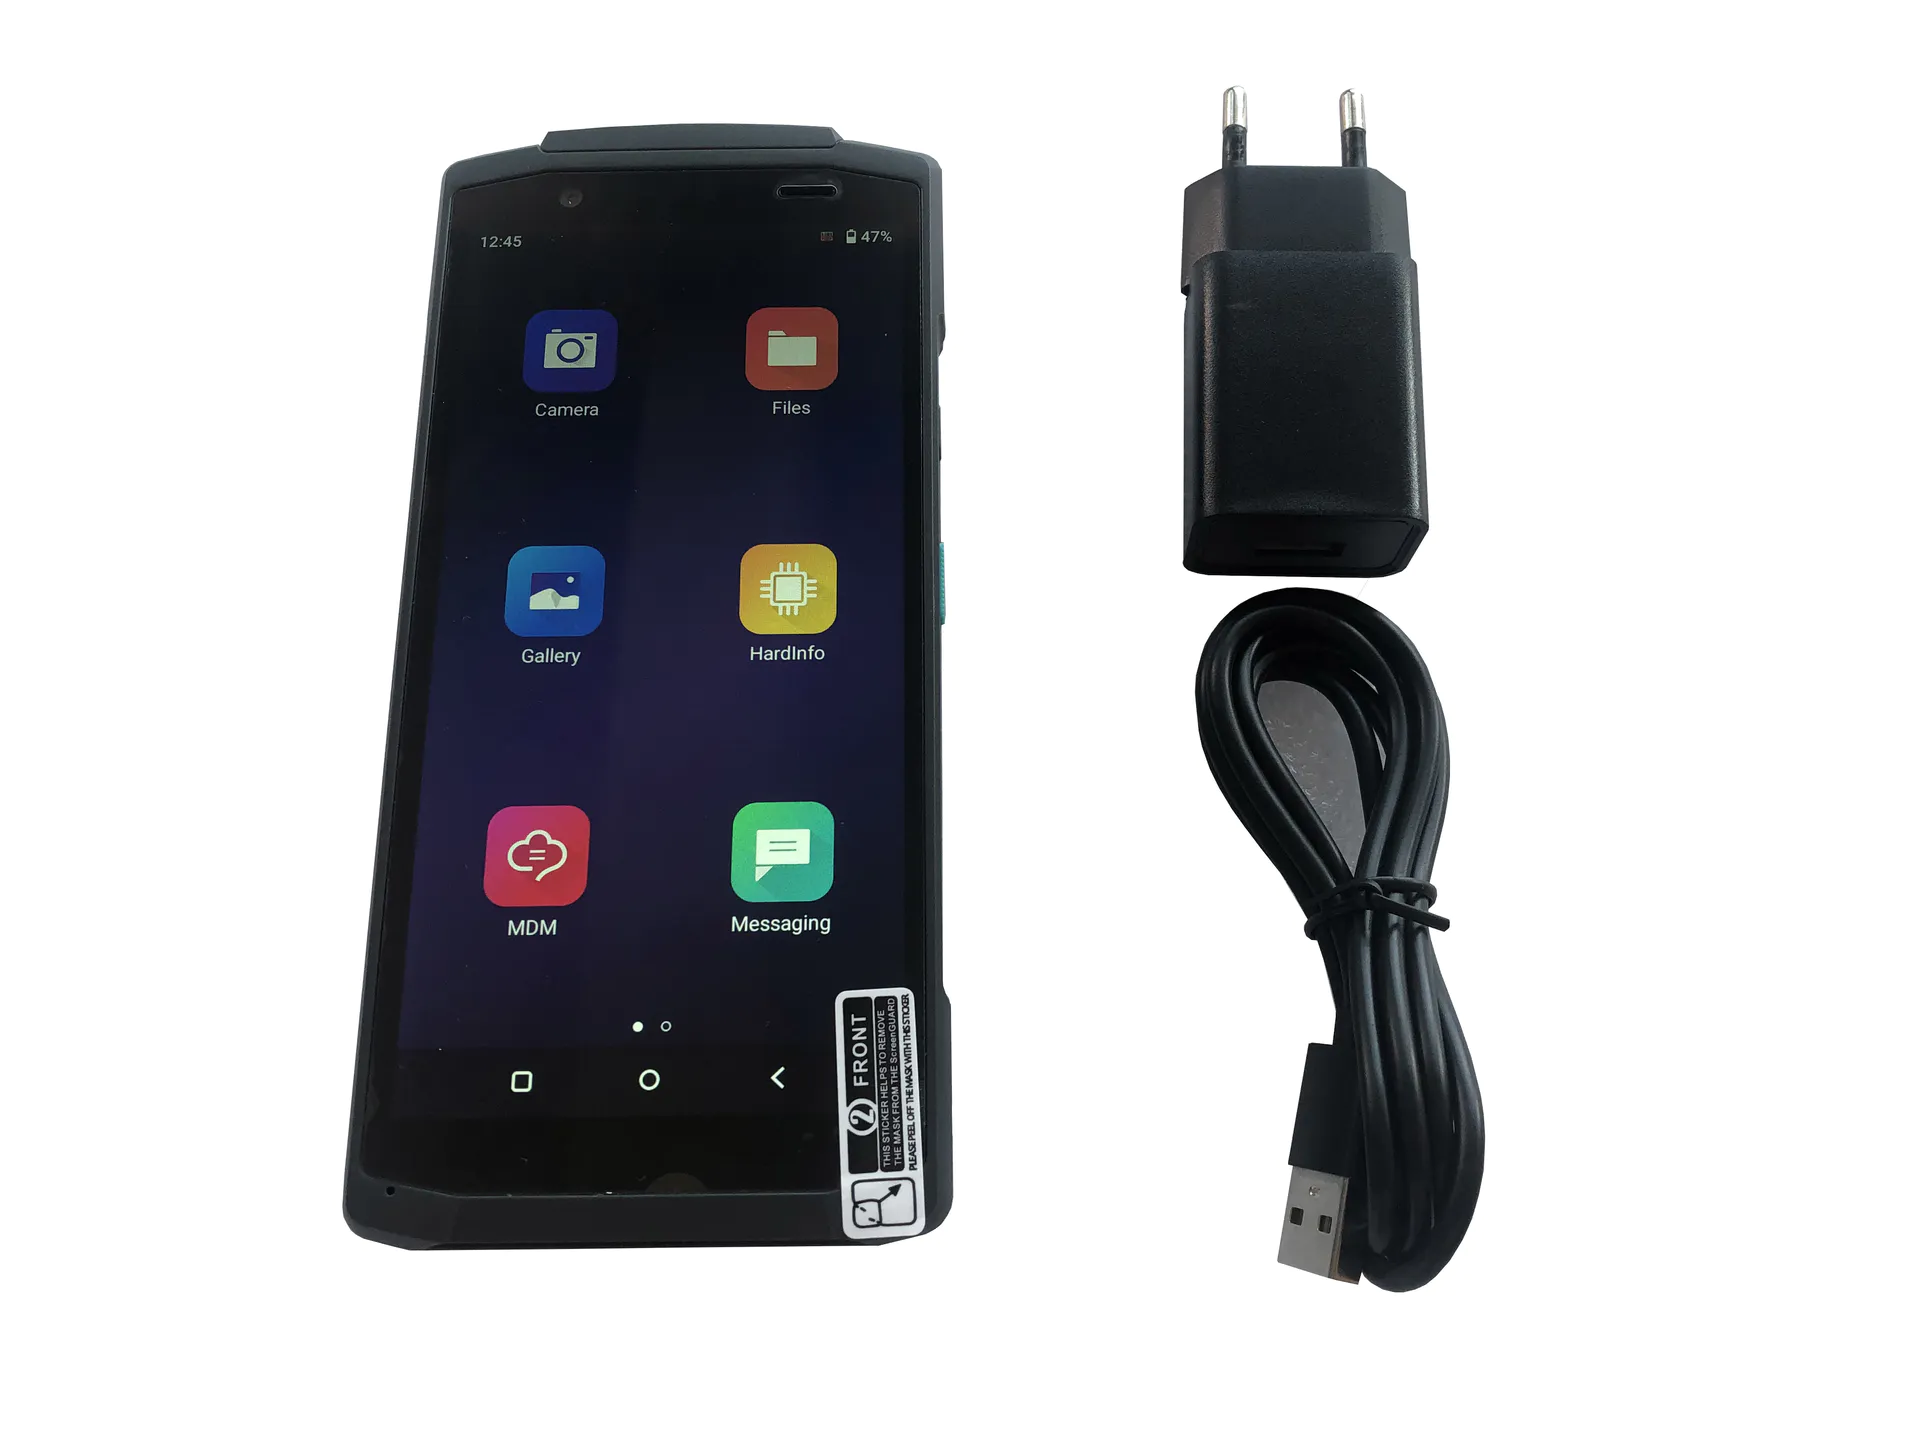 Android 10.0 Handheld Android 4G EFT POS Terminal with Barcode Scanner